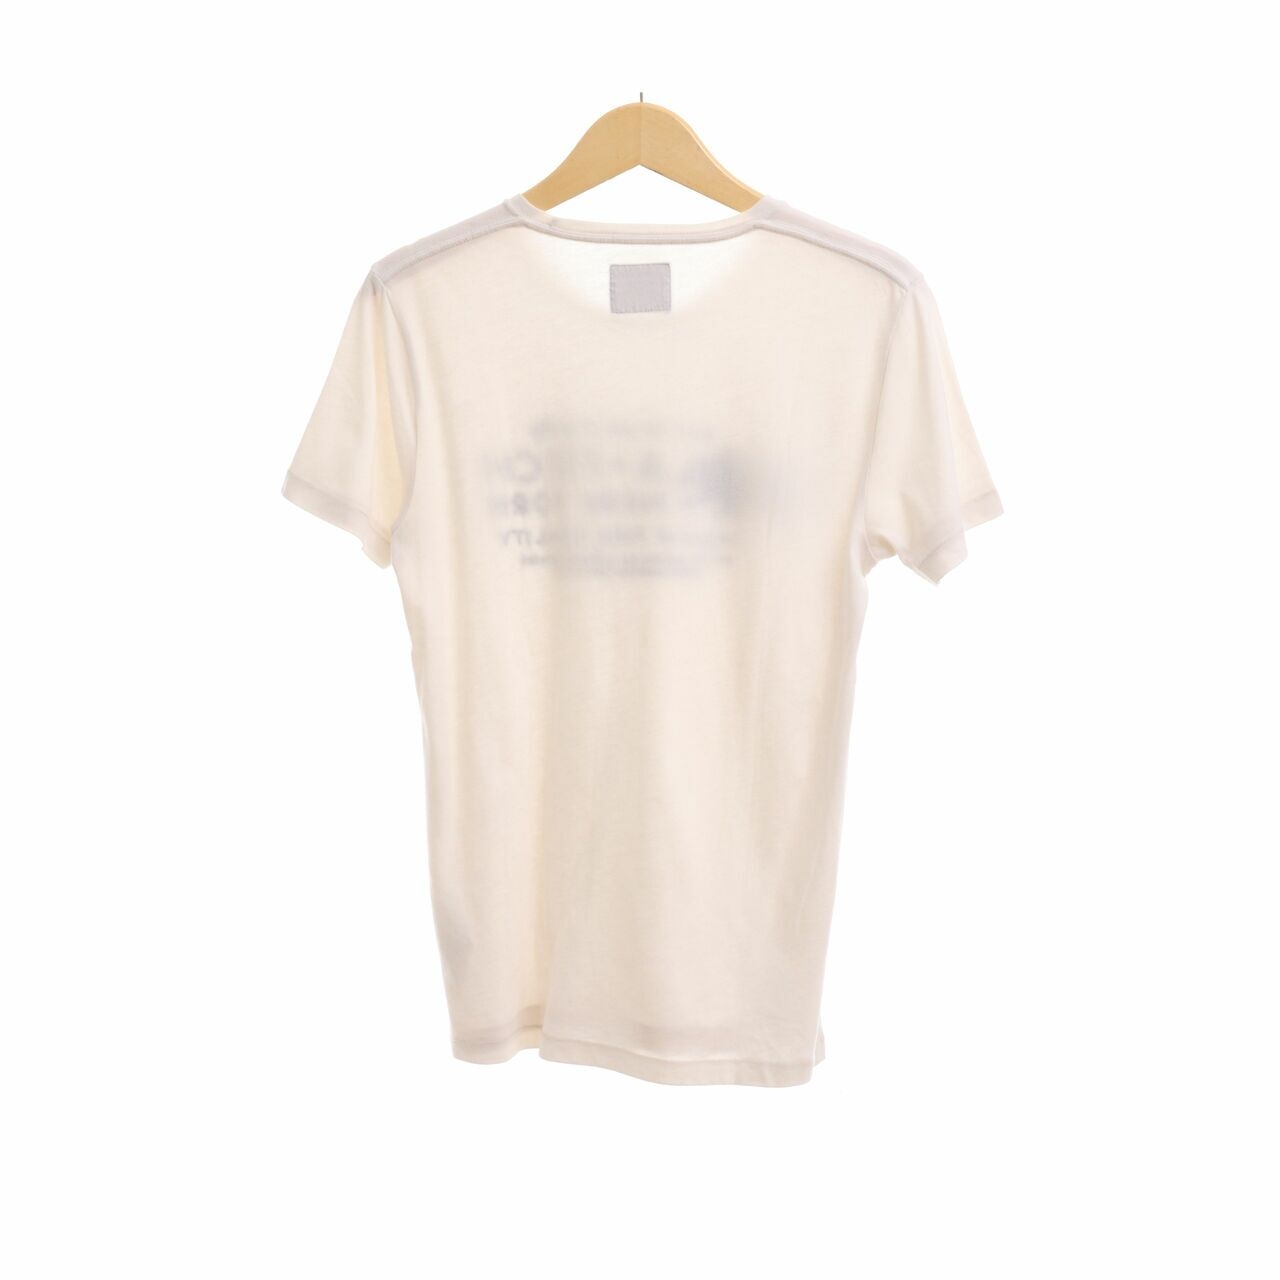 Abercrombie & Fitch Off White T-Shirt